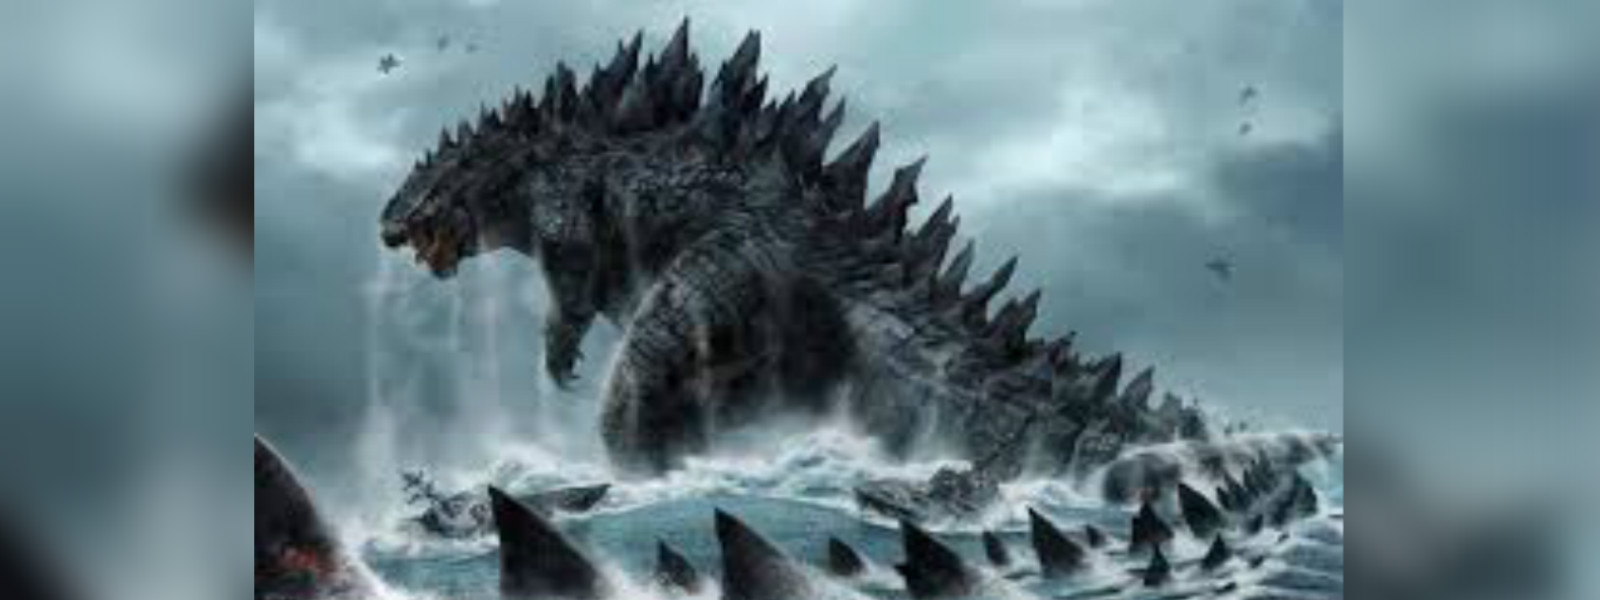 ‘Godzilla: King of the Monsters” roars into Hollywood